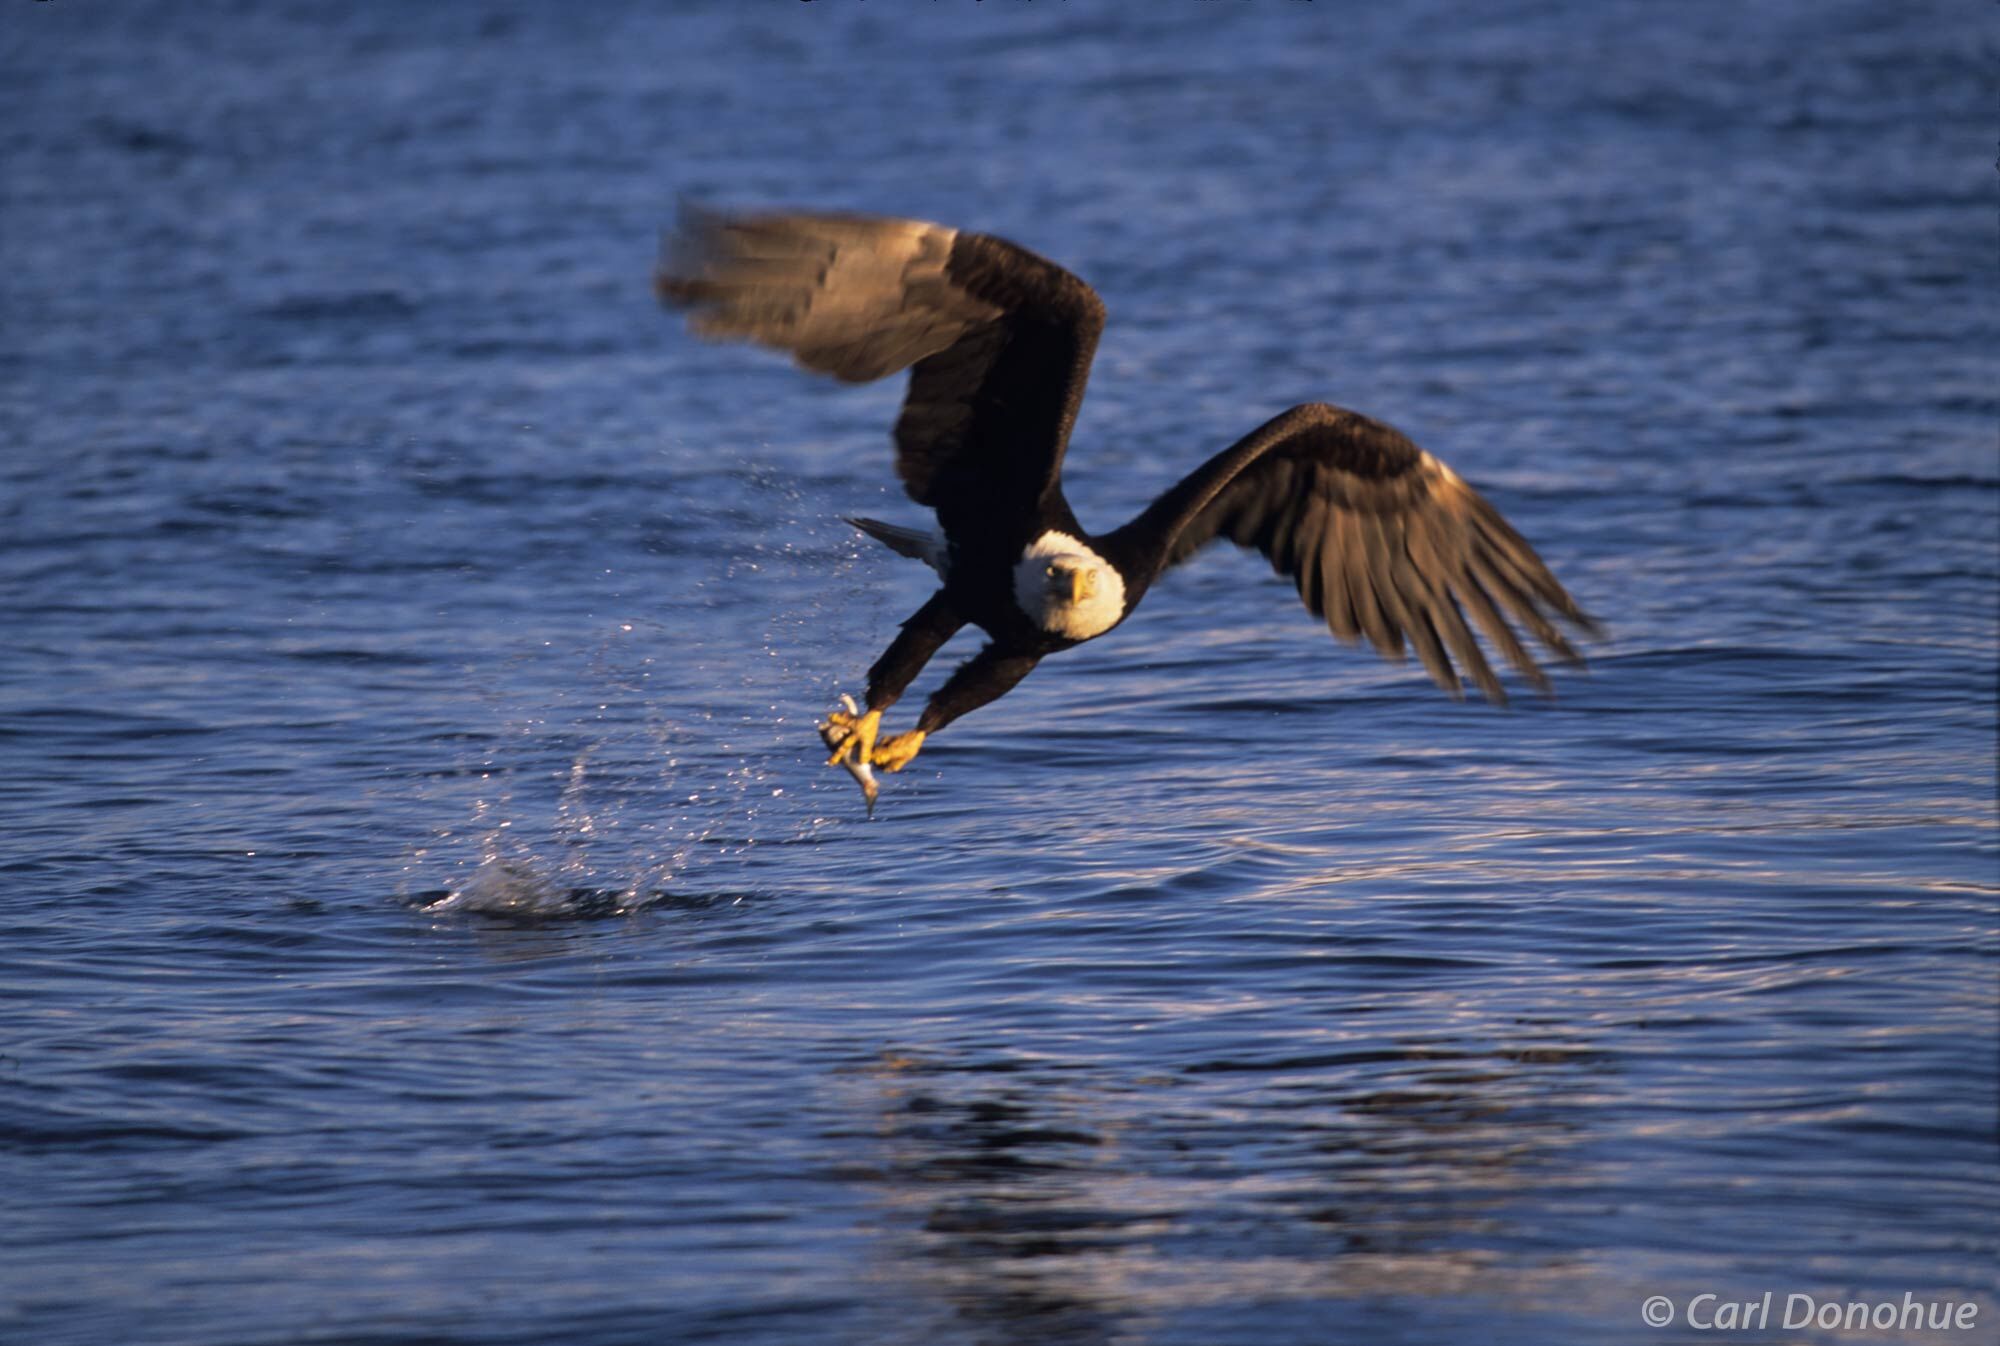 Bald Eagle flying, coming off the water with a fish in talons, Homer, Alaska.  Bald eagle fishing in Kachemak Bay, near Homer...